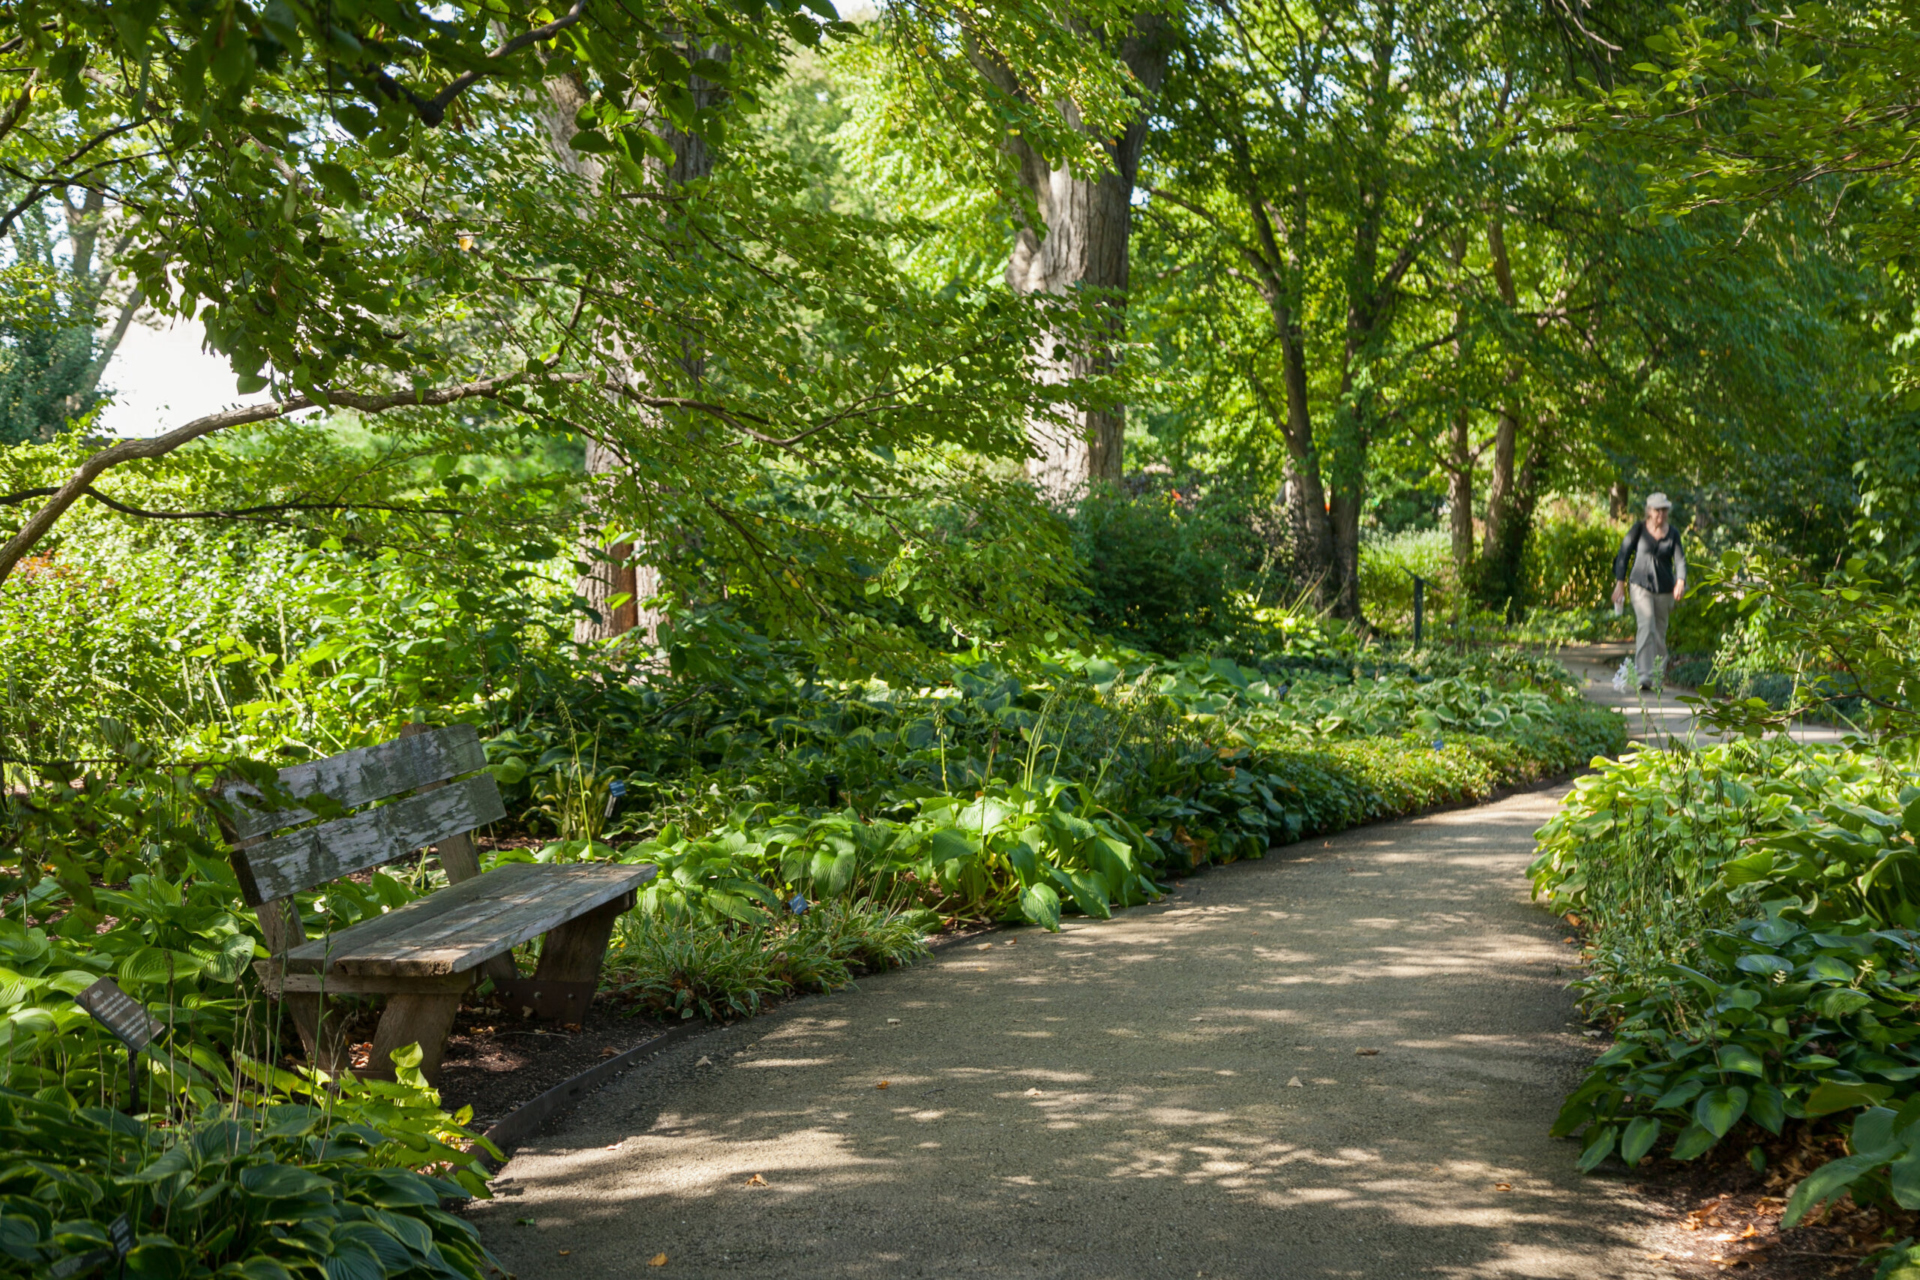 A woman walking through the Ground Cover Garden in the summer, showcasing a variety of plants growing in the shade.